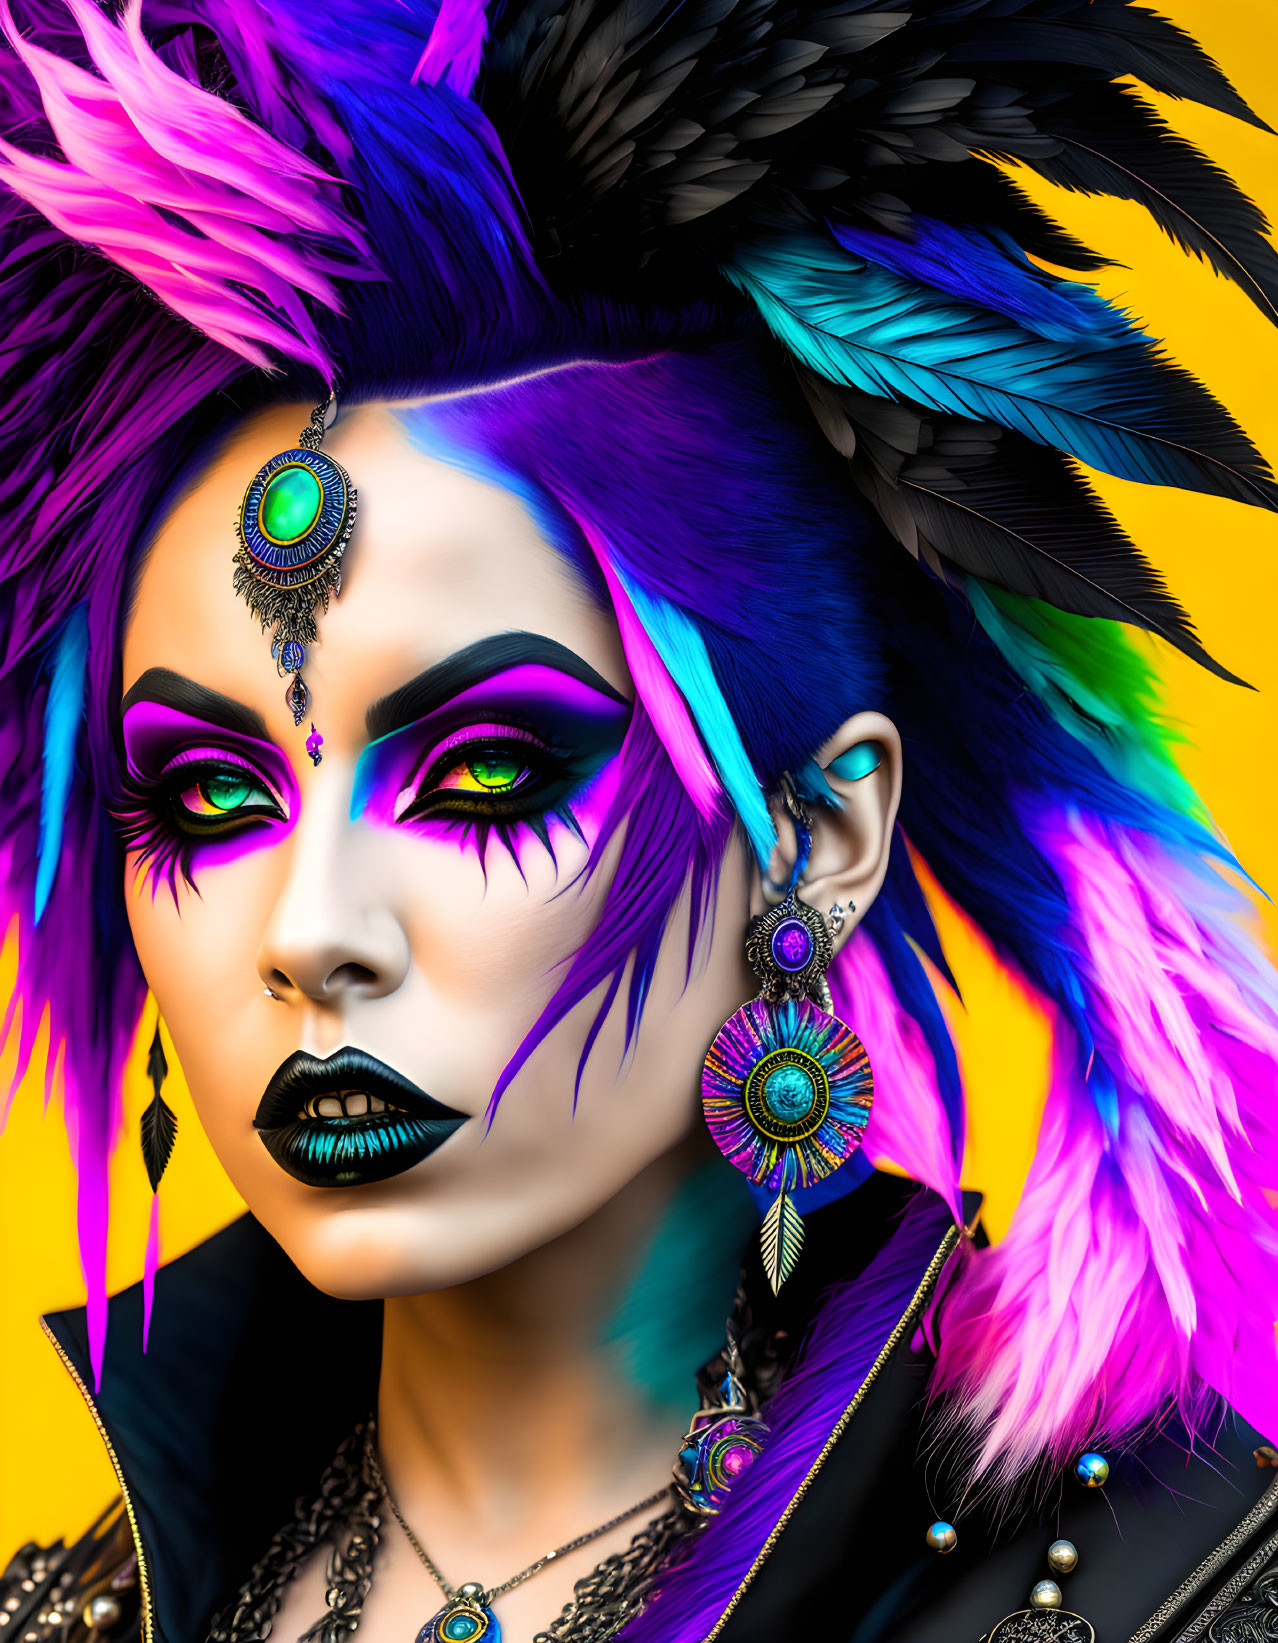 Colorful portrait of a person with purple hair, dramatic makeup, and feather accessories